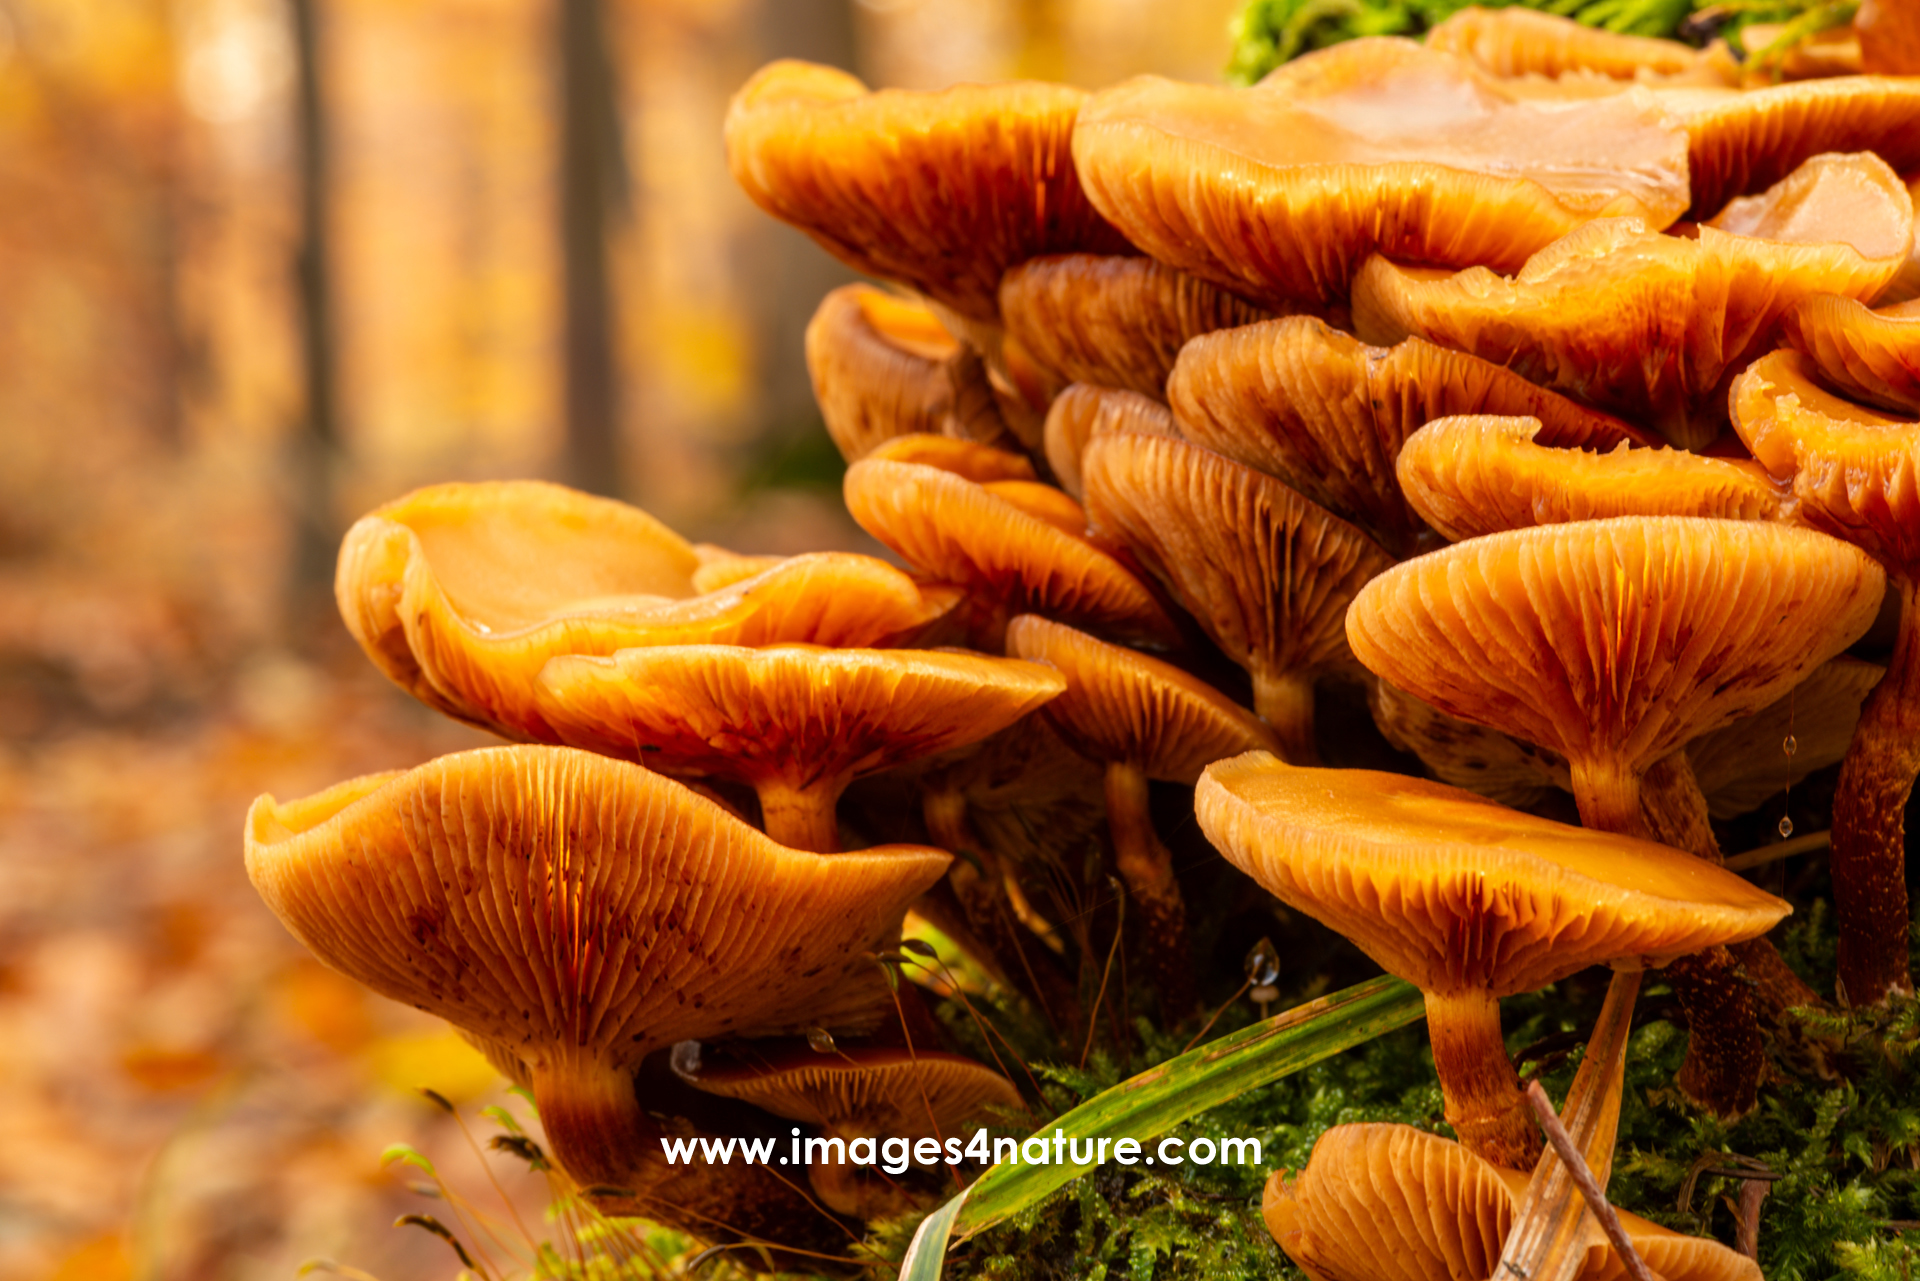 A large group of yellow mushrooms growing in autumn forest